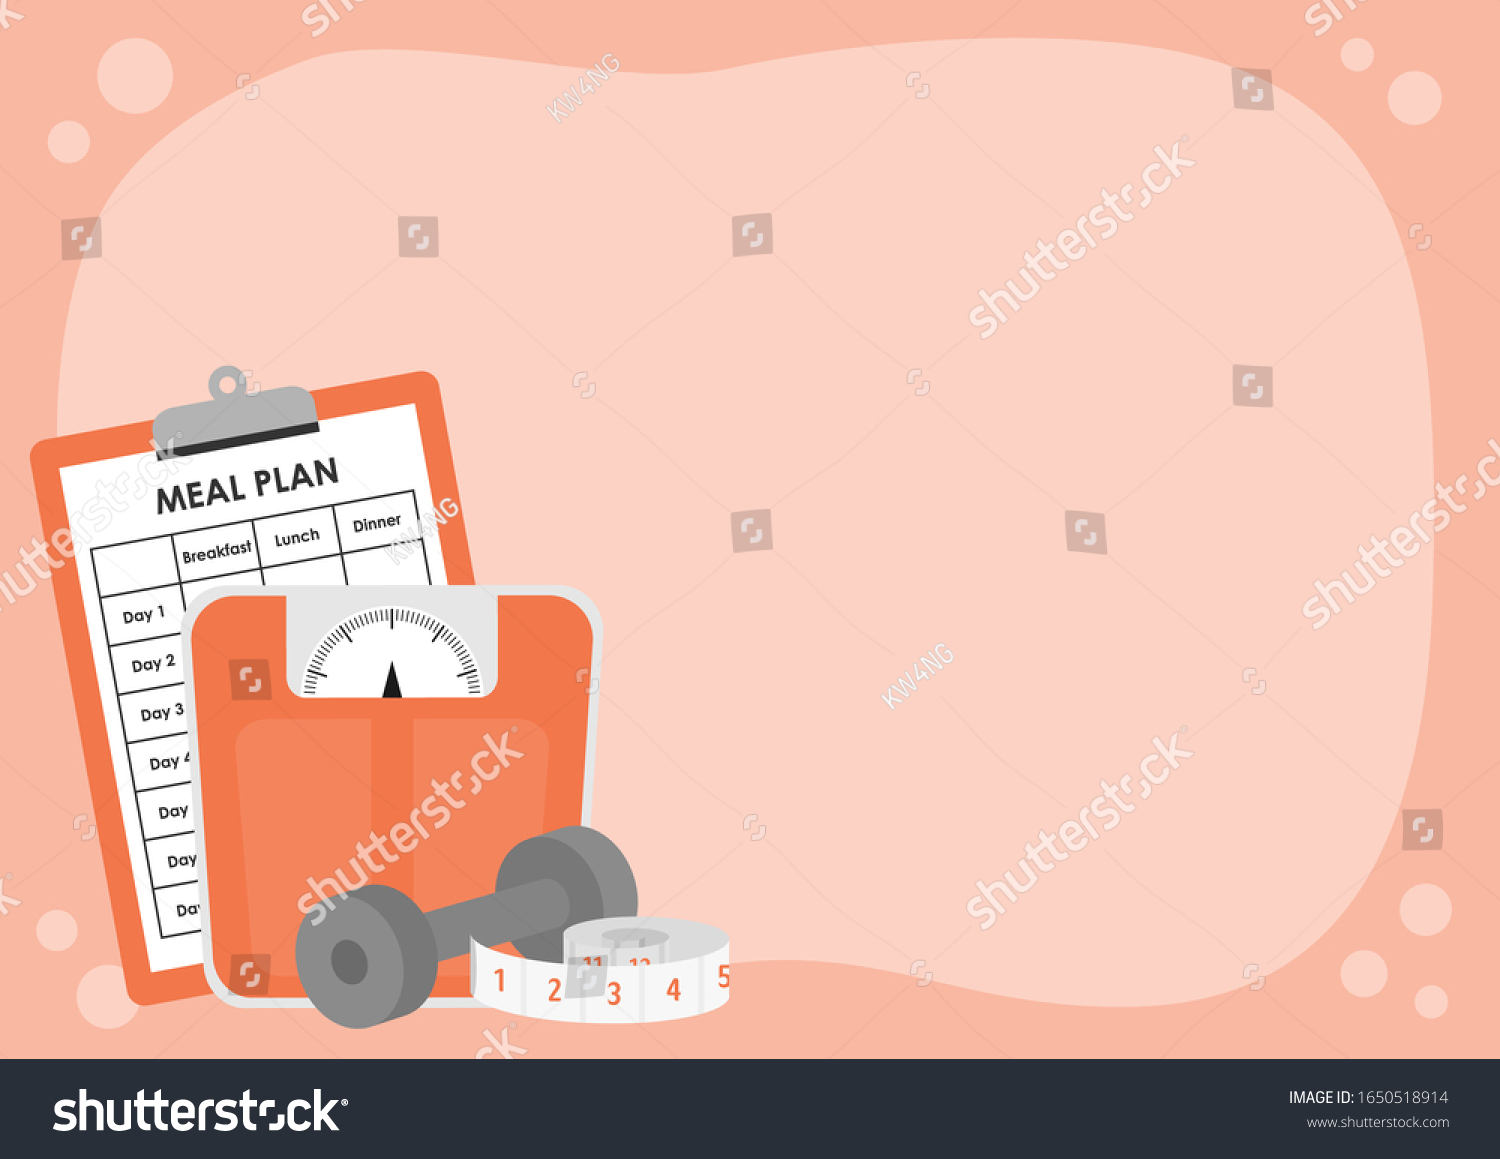 SVG of Clipboard with meal plan schedule, weight scale, dumbbell and measuring tape on orange background with copy space. Wallpaper for healthcare, healthy diet and nutrition concept. Vector illustration. svg